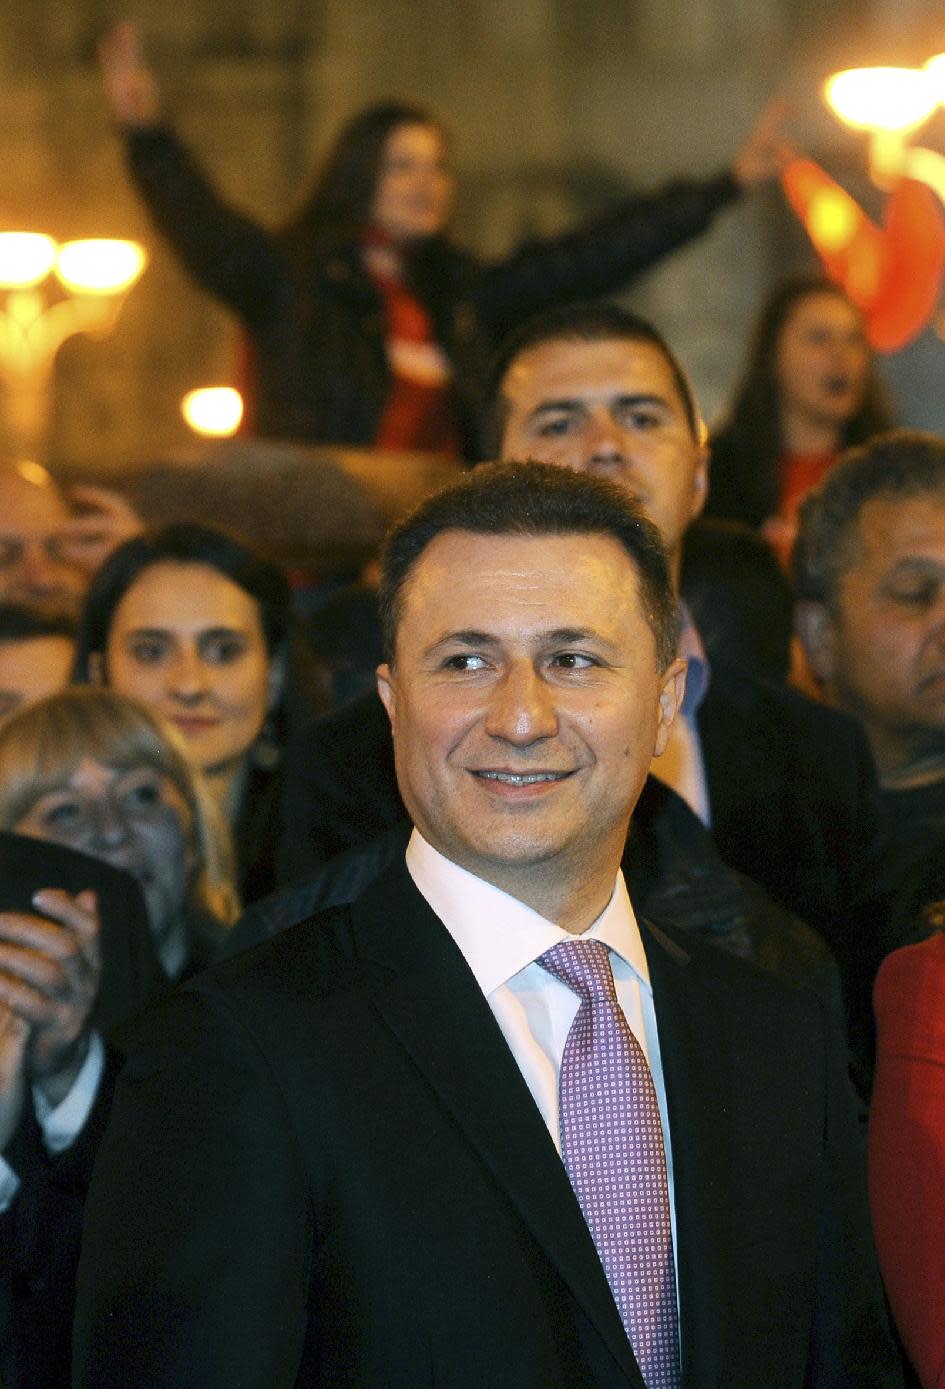 Macedonian Prime Minister and leader of the ruling conservative VMRO-DPMNE Nikola Gruevski, center, attends a celebration of the party's double victory in parliamentary and presidential elections, in downtown Skopje, Macedonia, early Monday, April 28, 2014. Macedonia's incumbent prime minister claimed a landslide victory late Sunday in parliamentary and presidential elections, but the center-left opposition denounced what it called distorting interference in the democratic process by the ruling party and said it won't recognize the results. (AP Photo/Boris Grdanoski)